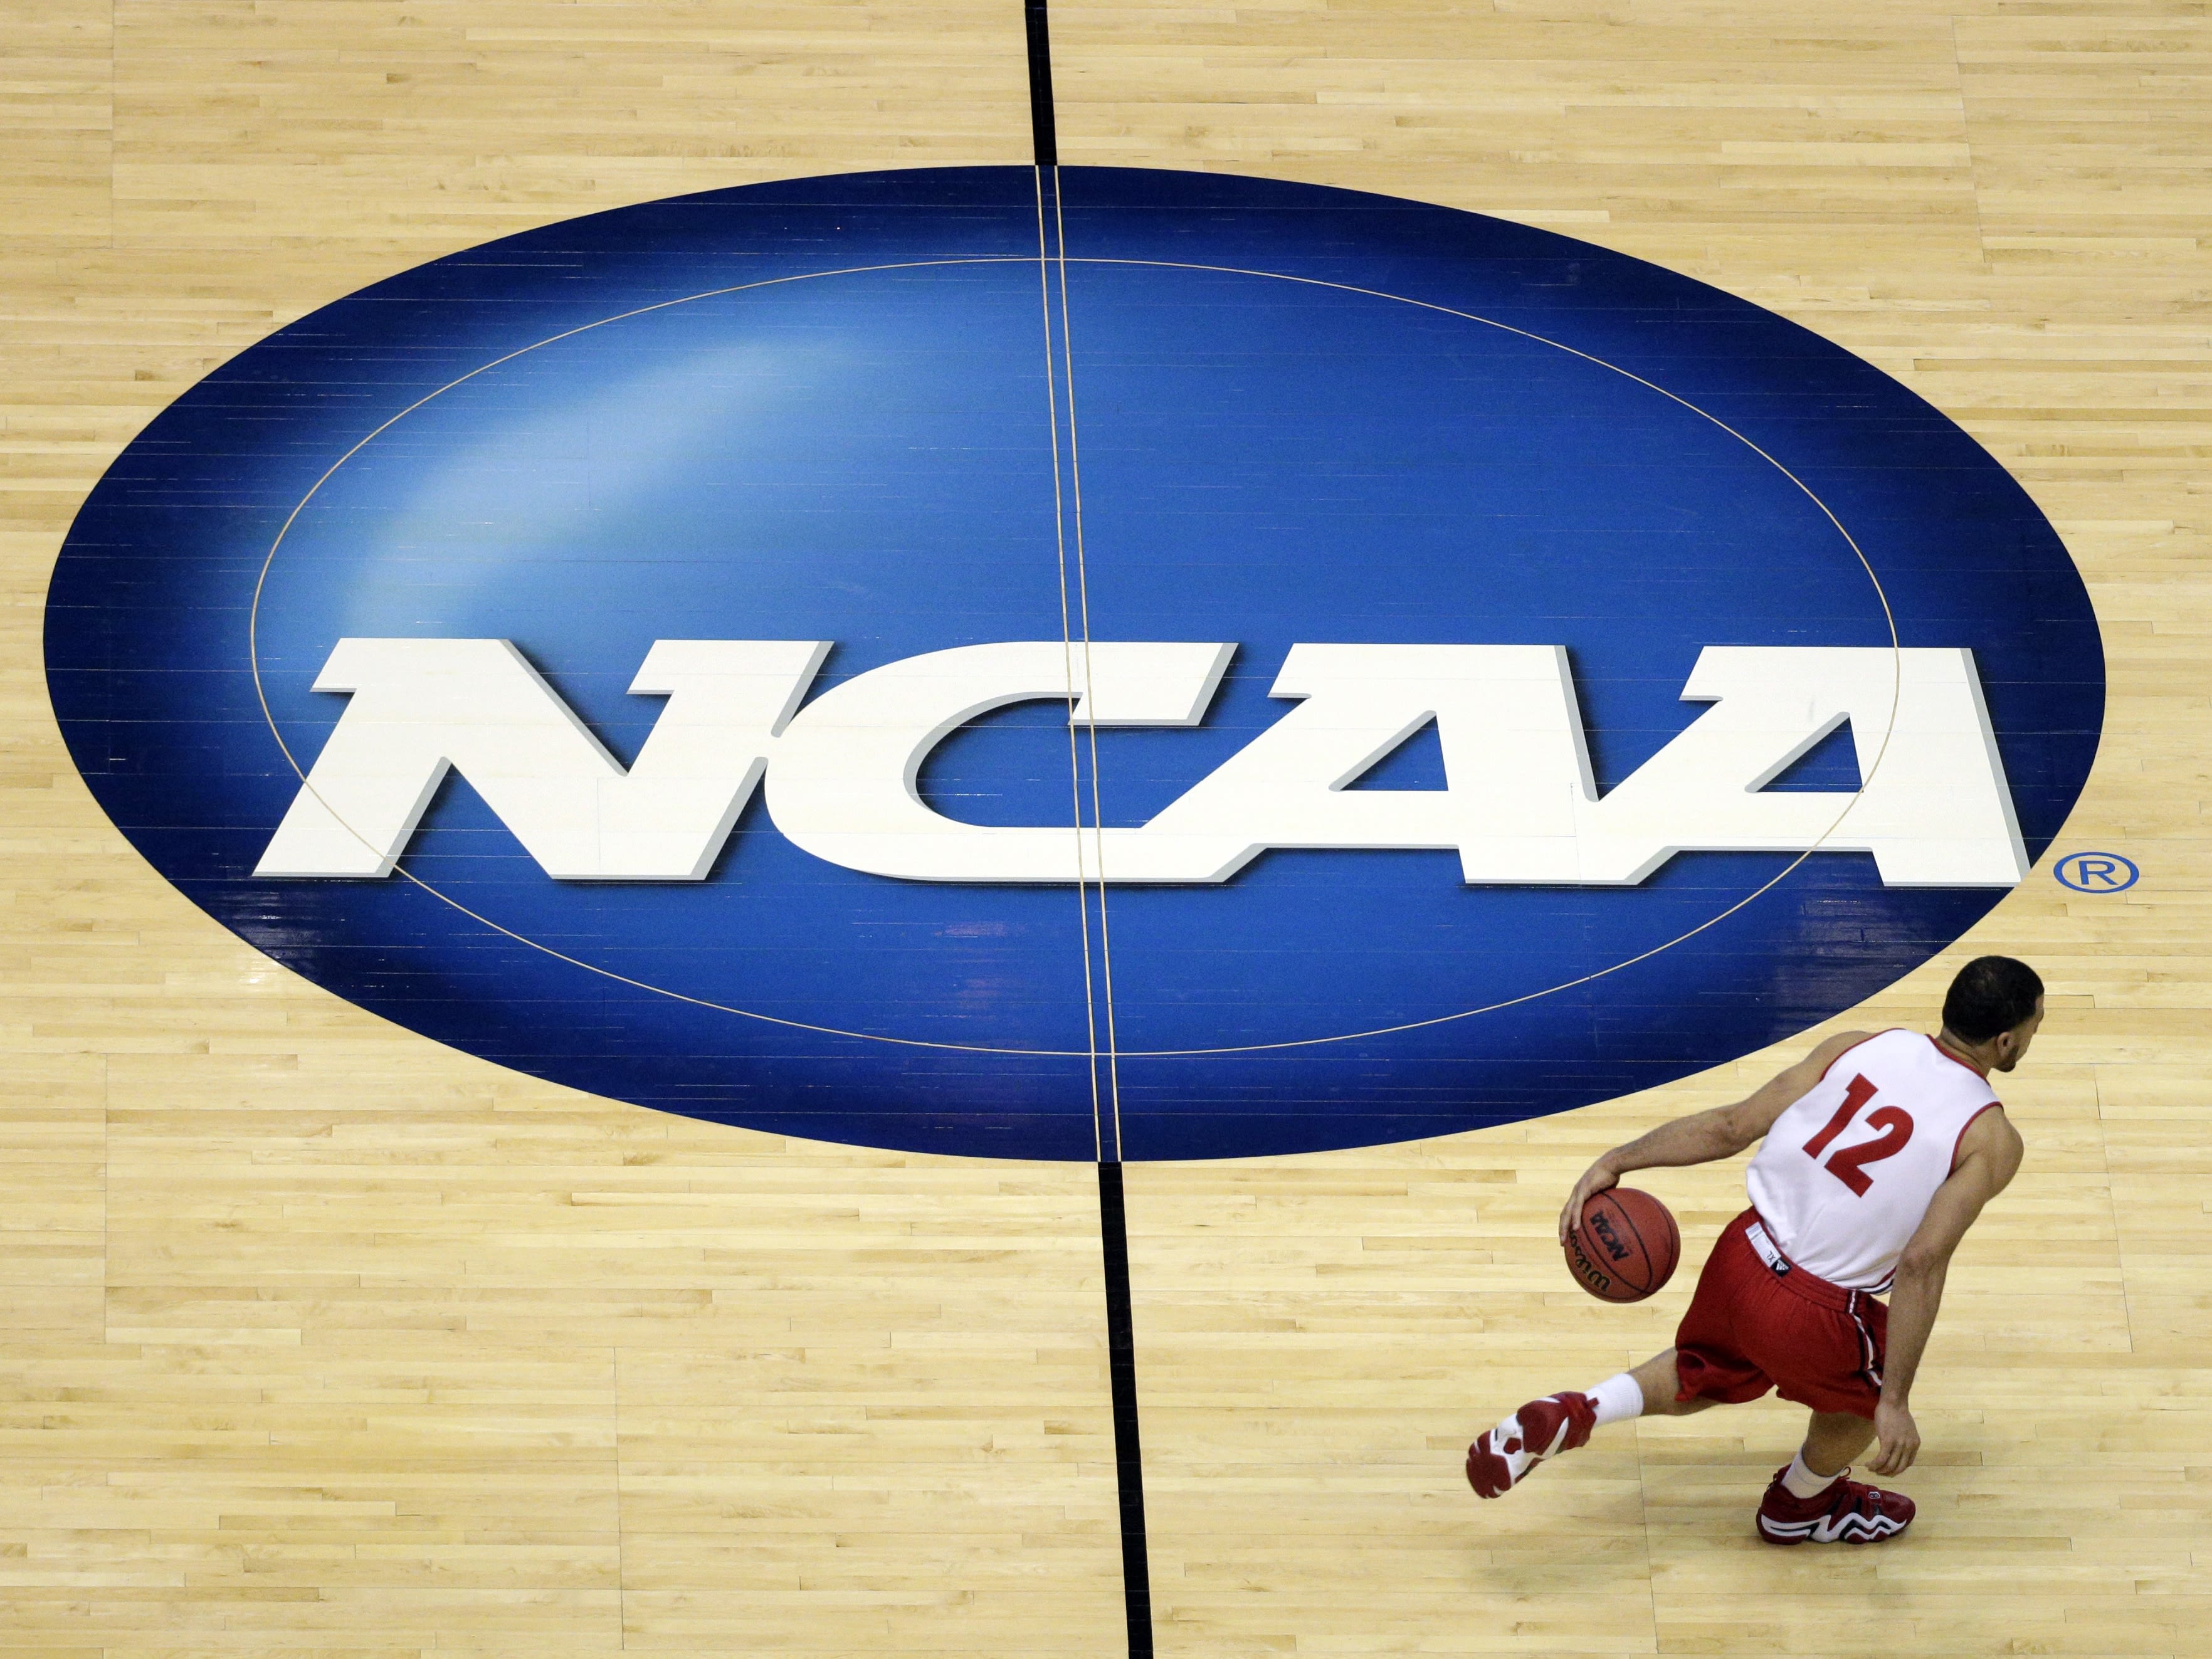 NCAA, leagues back $2.8B settlement, setting stage for major change in college sports